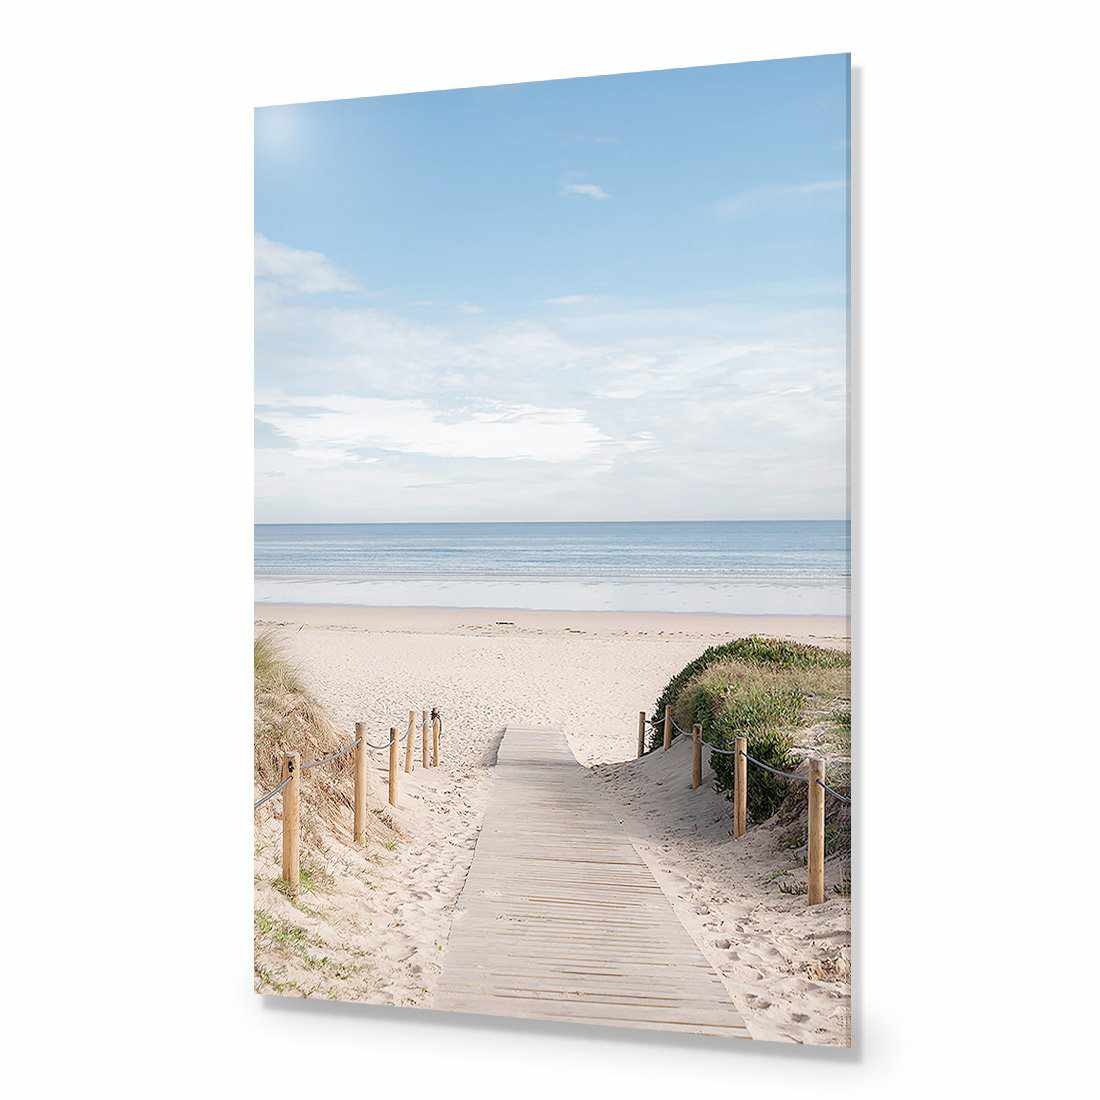 Pathway To The Sea-Acrylic-Wall Art Design-Without Border-Acrylic - No Frame-45x30cm-Wall Art Designs